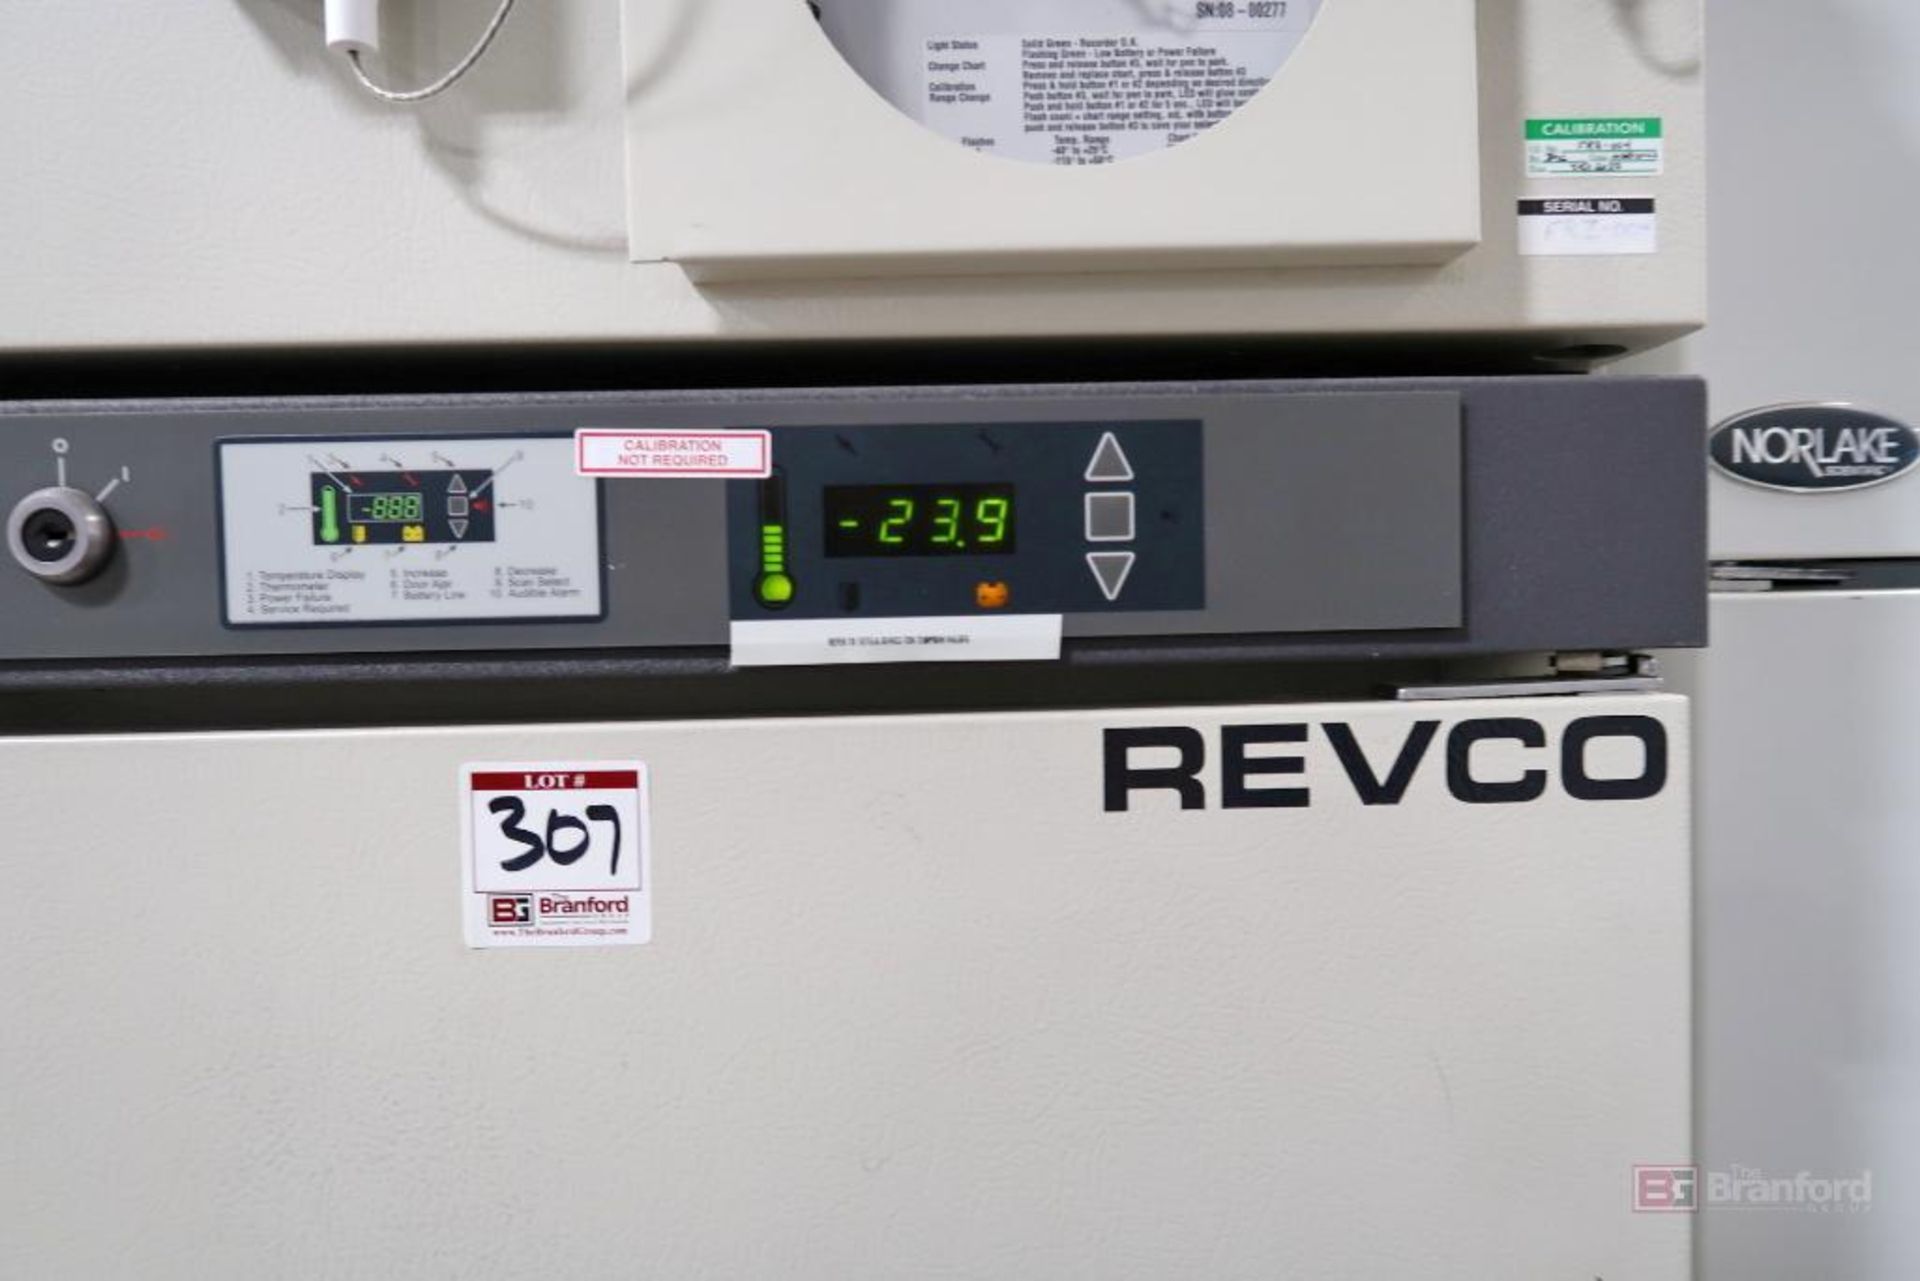 Revco single stage system refrigerator - Image 2 of 2